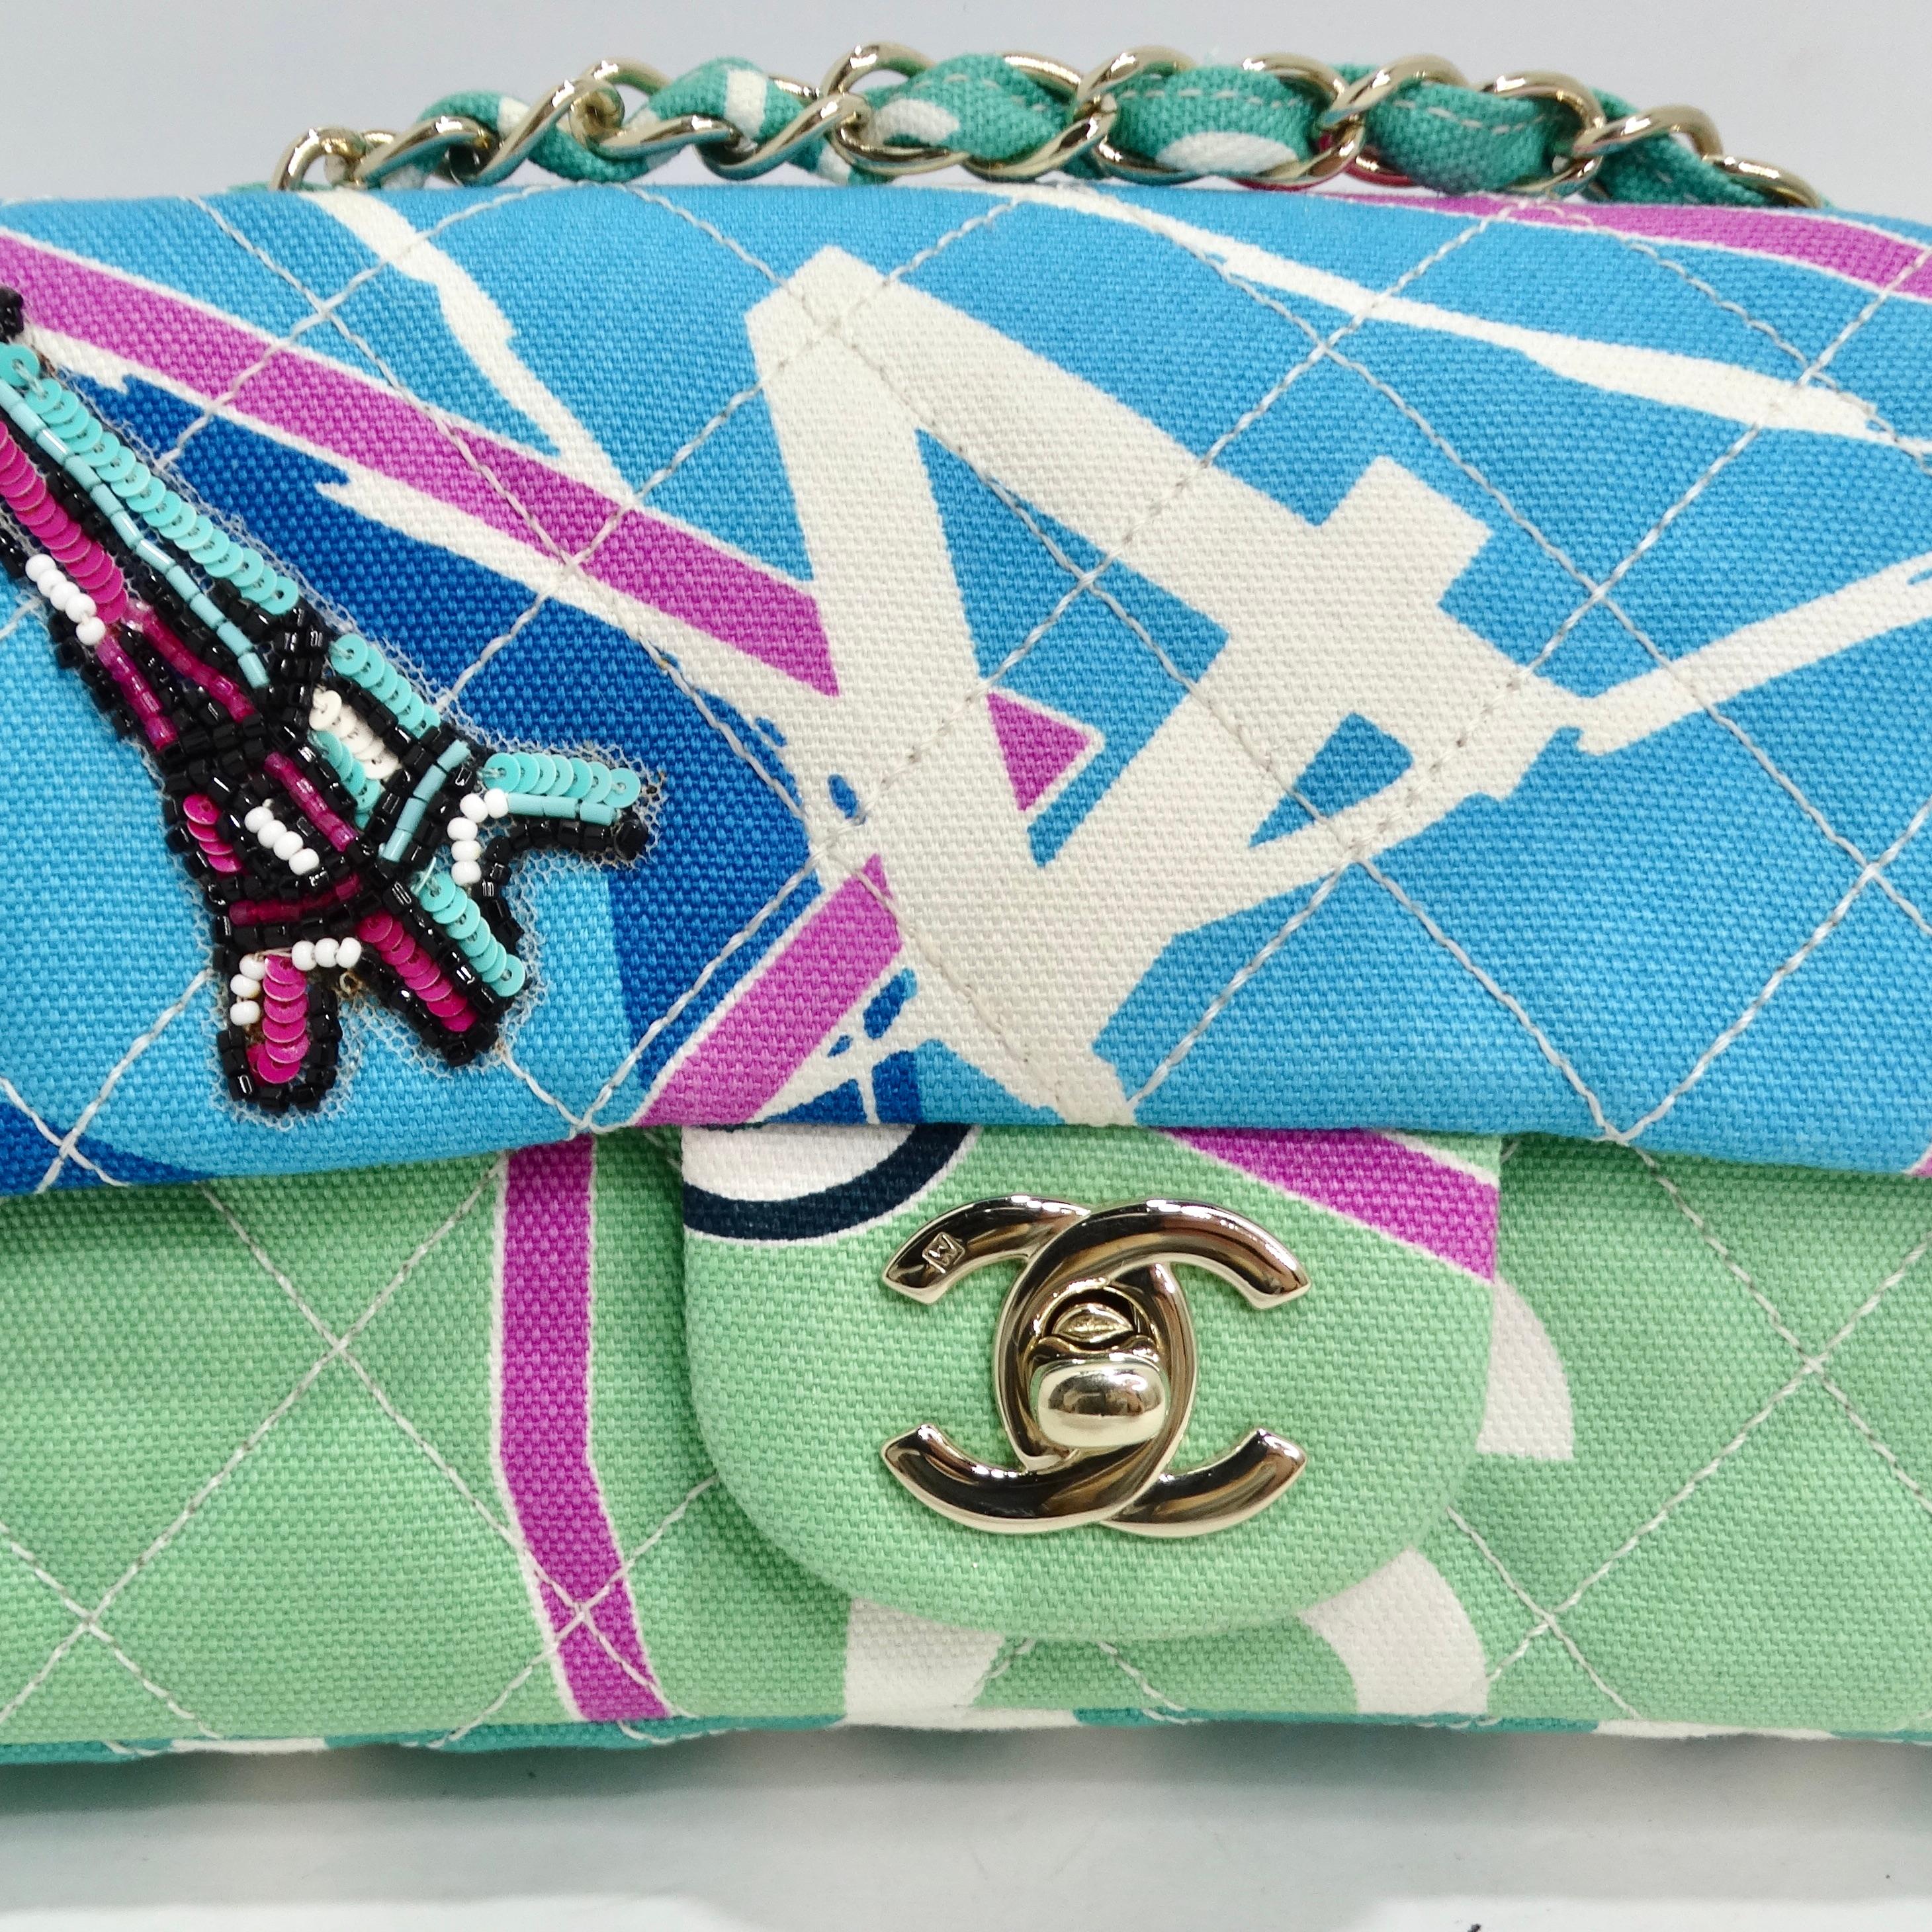 Chanel Canvas Printed Eiffel Tower Flap Bag In Excellent Condition For Sale In Scottsdale, AZ